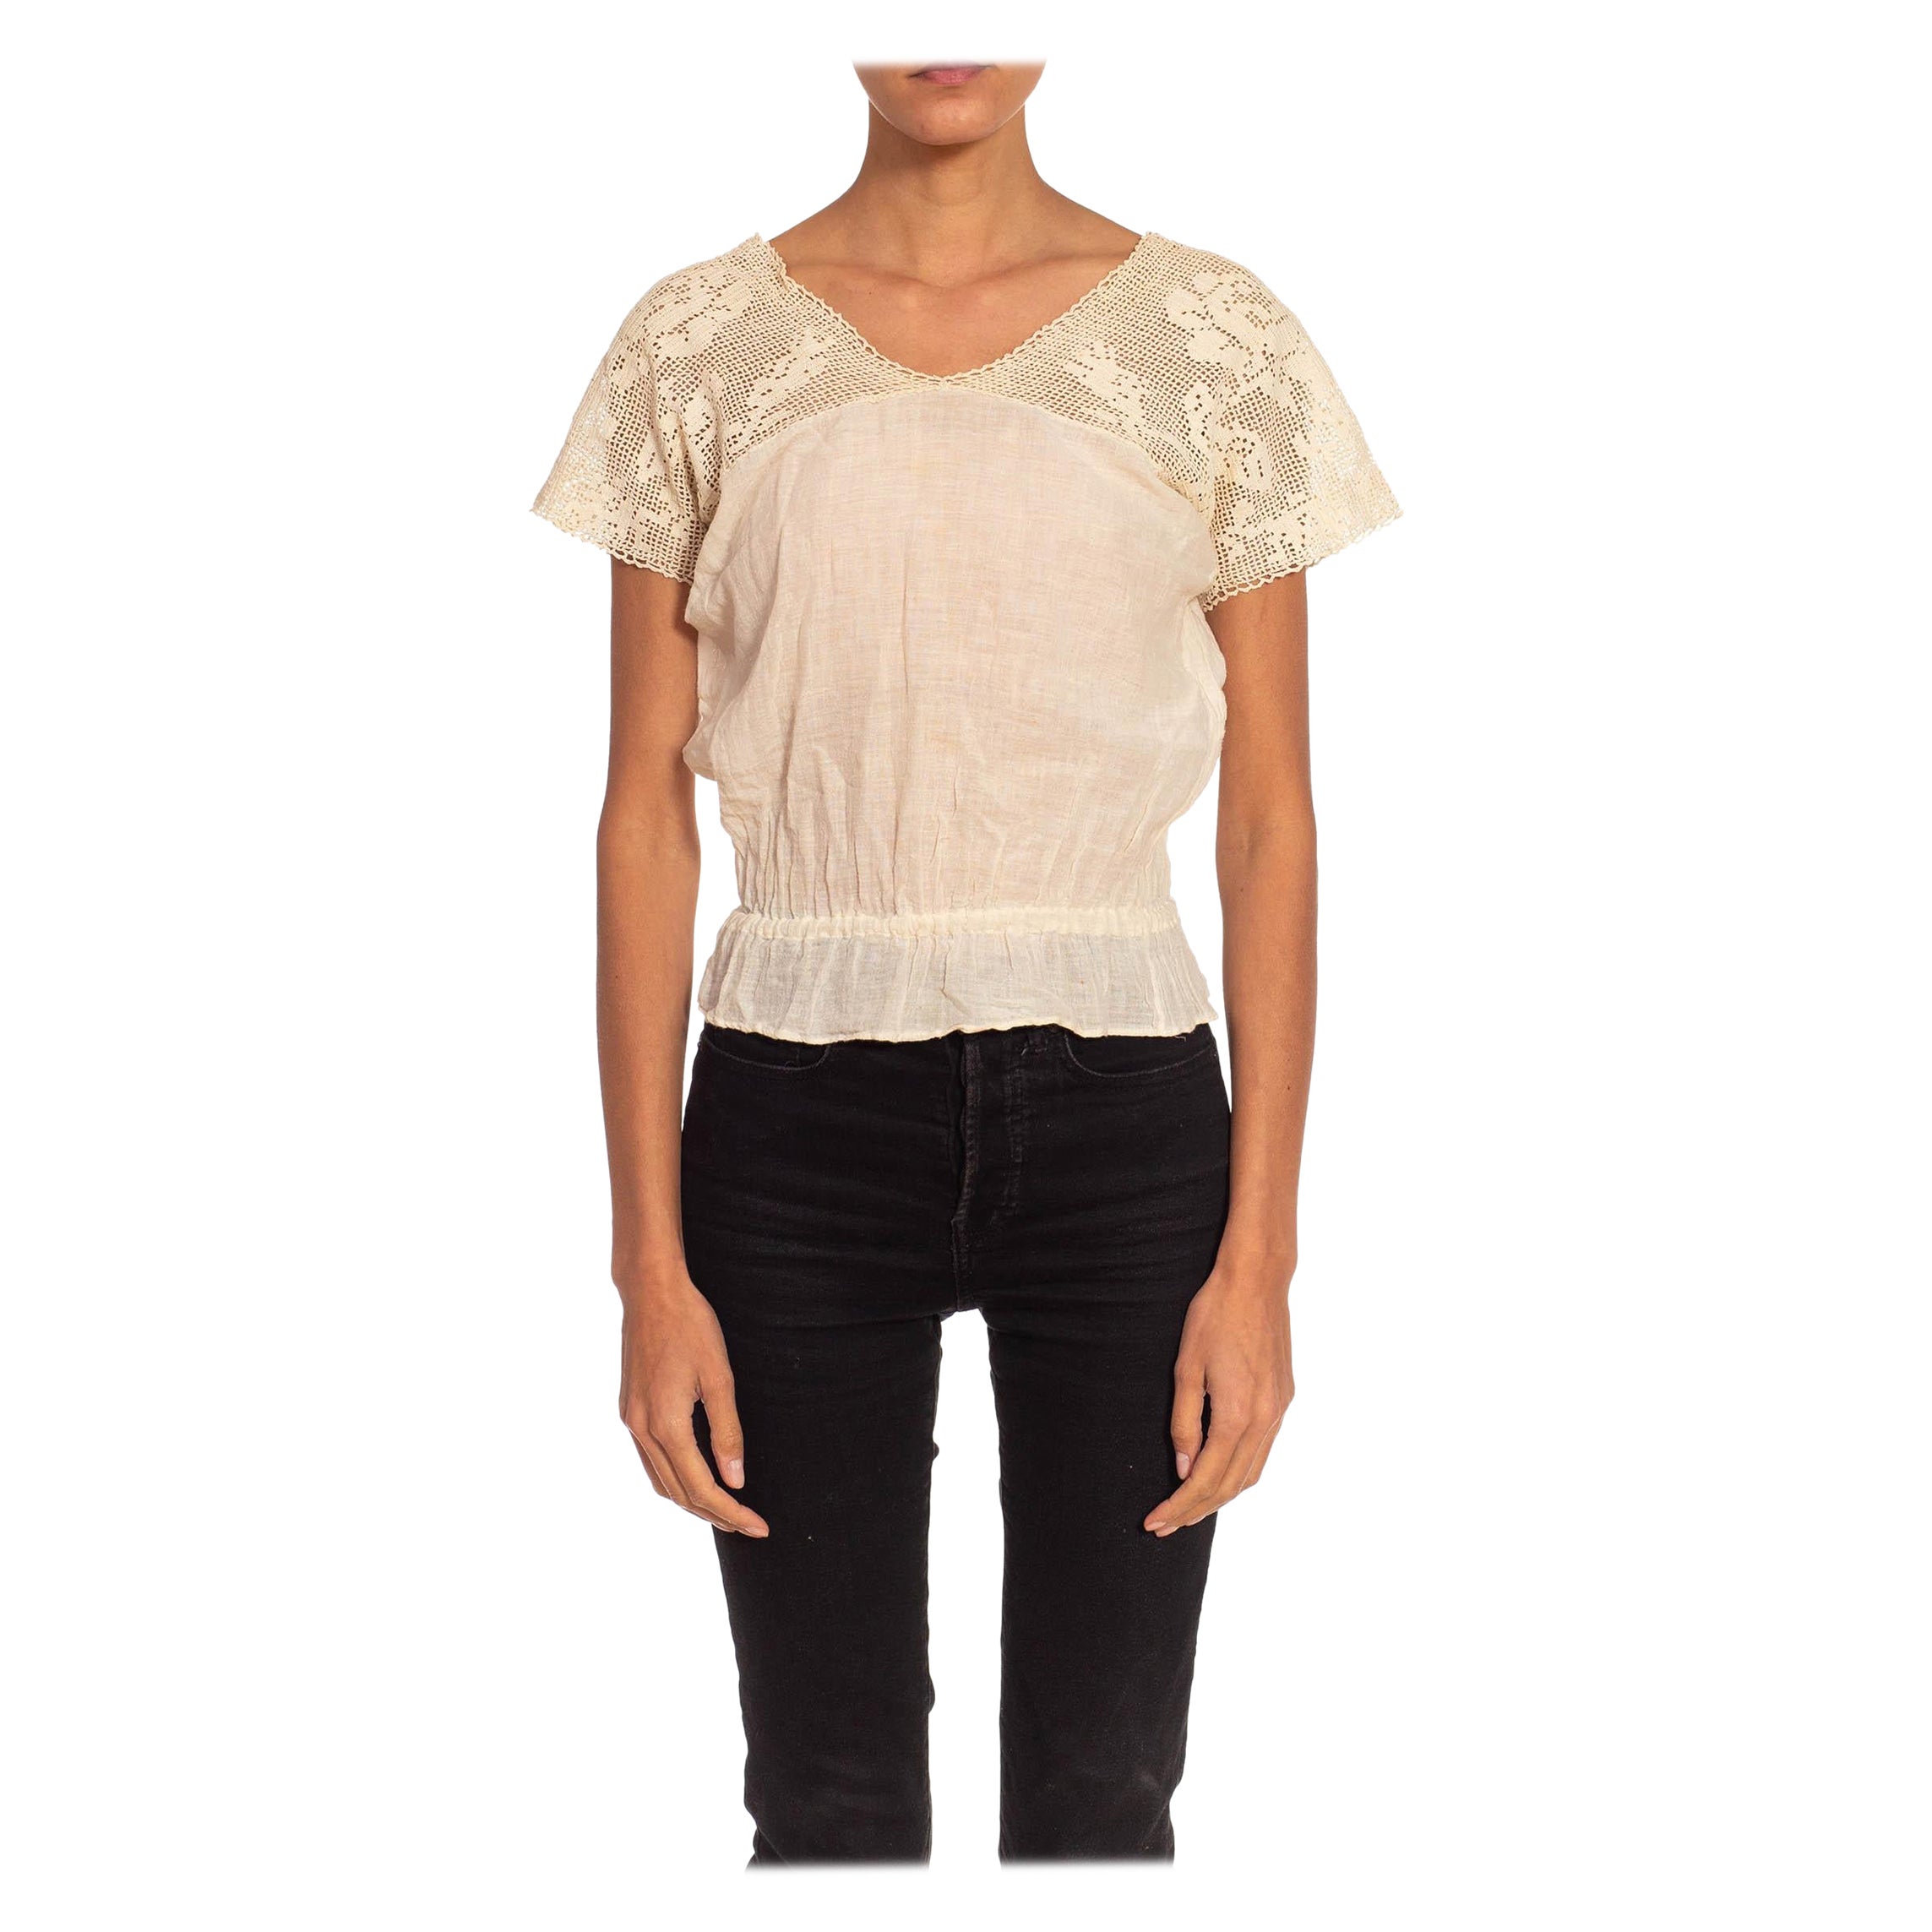 Victorian Off White Cotton Lace Top With Elastic Waist For Sale